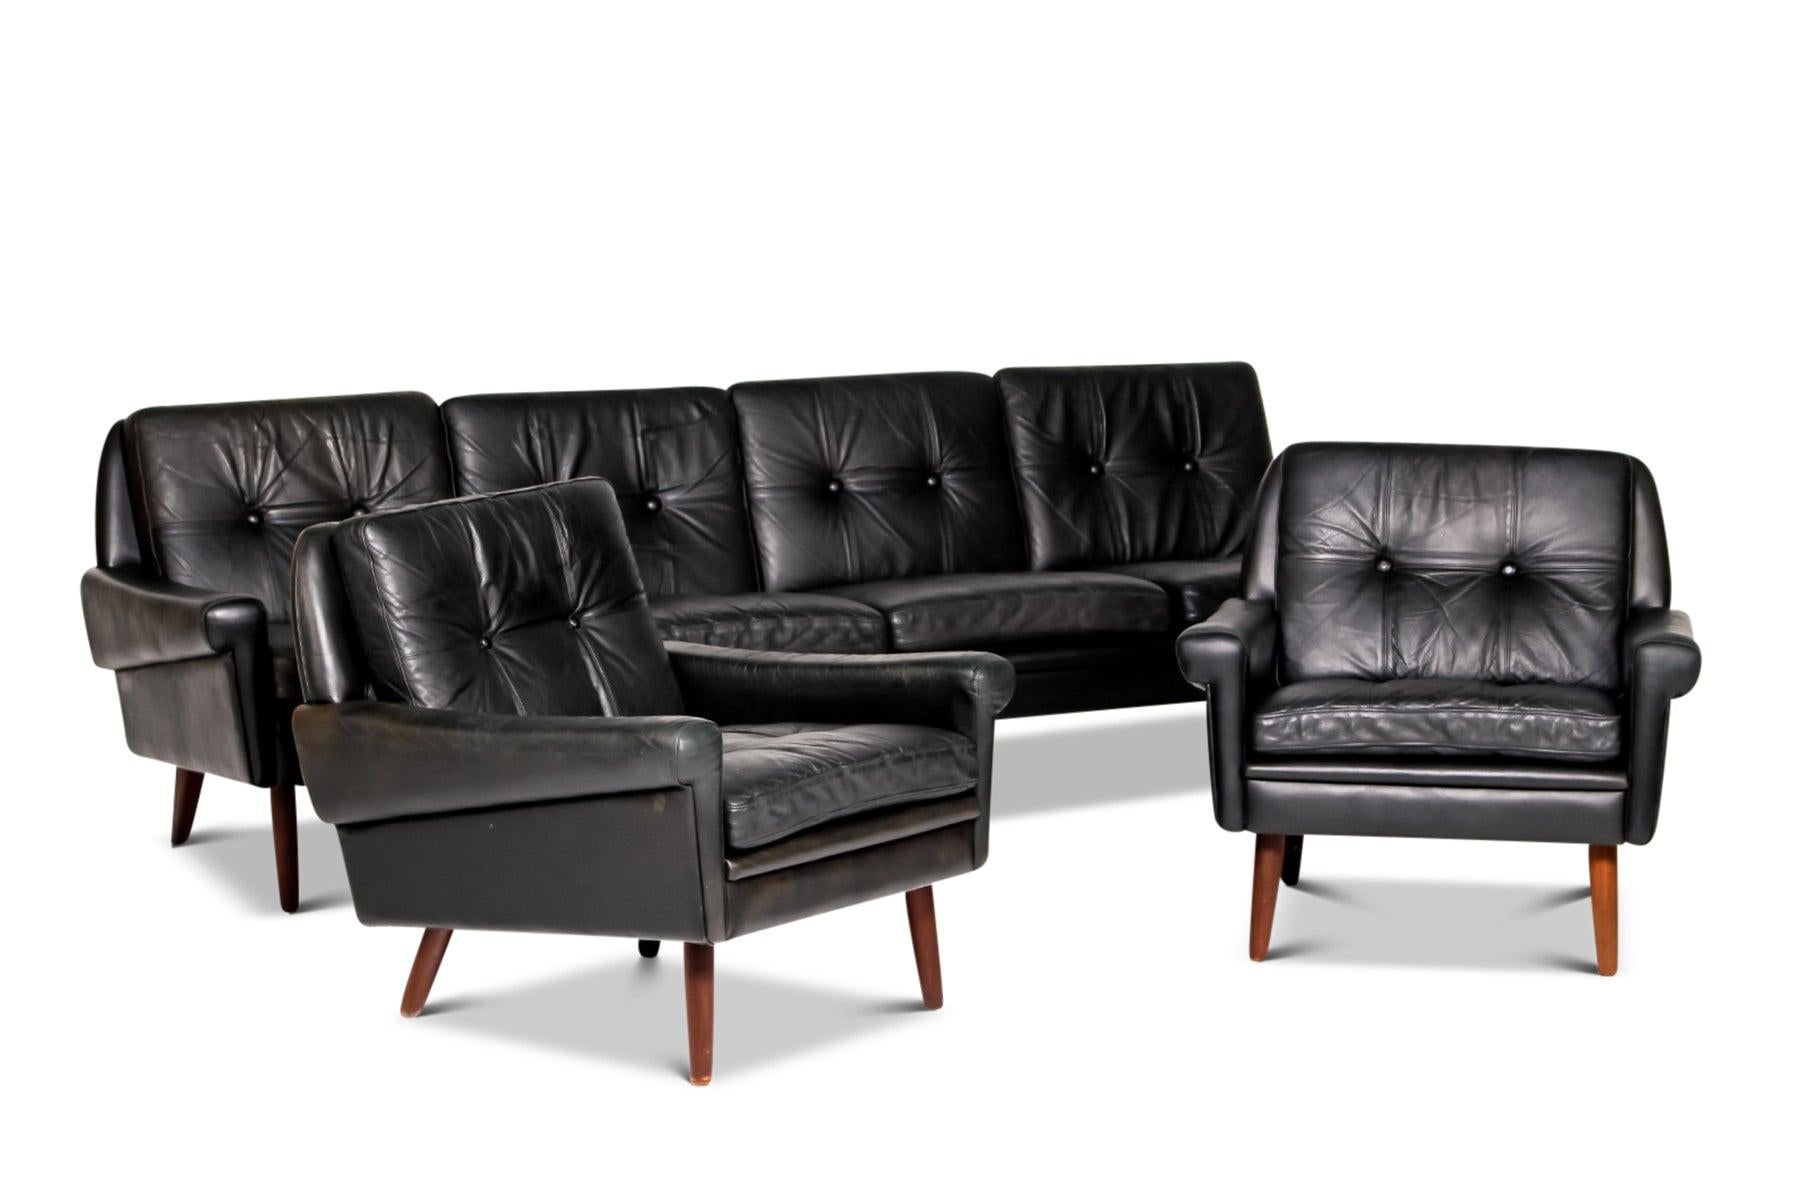 Danish Svend Skipper Four Seat Sofa in Black Leather + Pair of Matching Armchairs For Sale